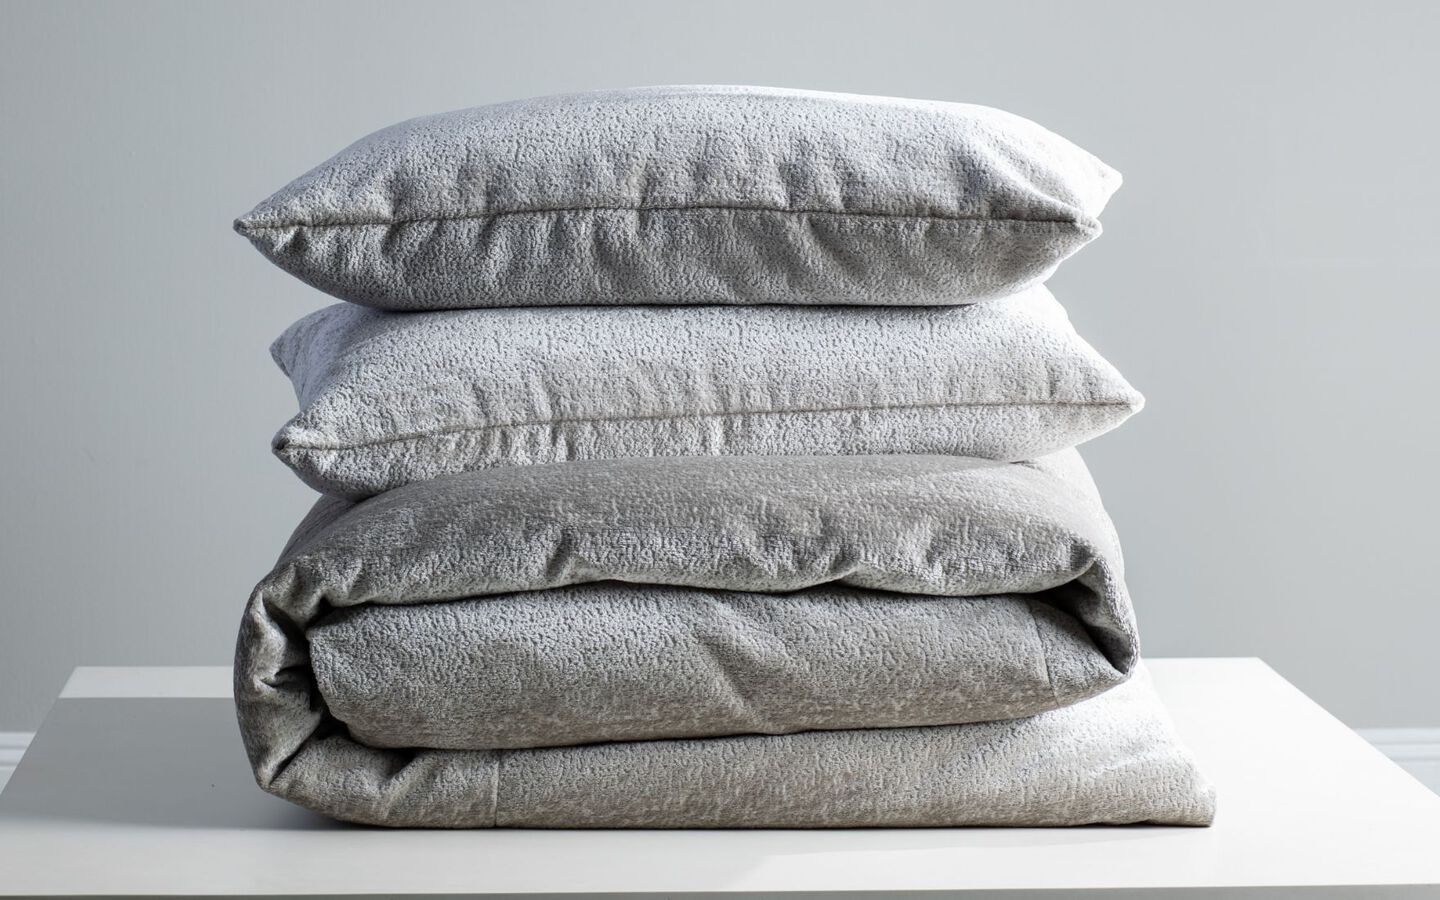 Closeup image of grey comforter and pillows stacked vertically